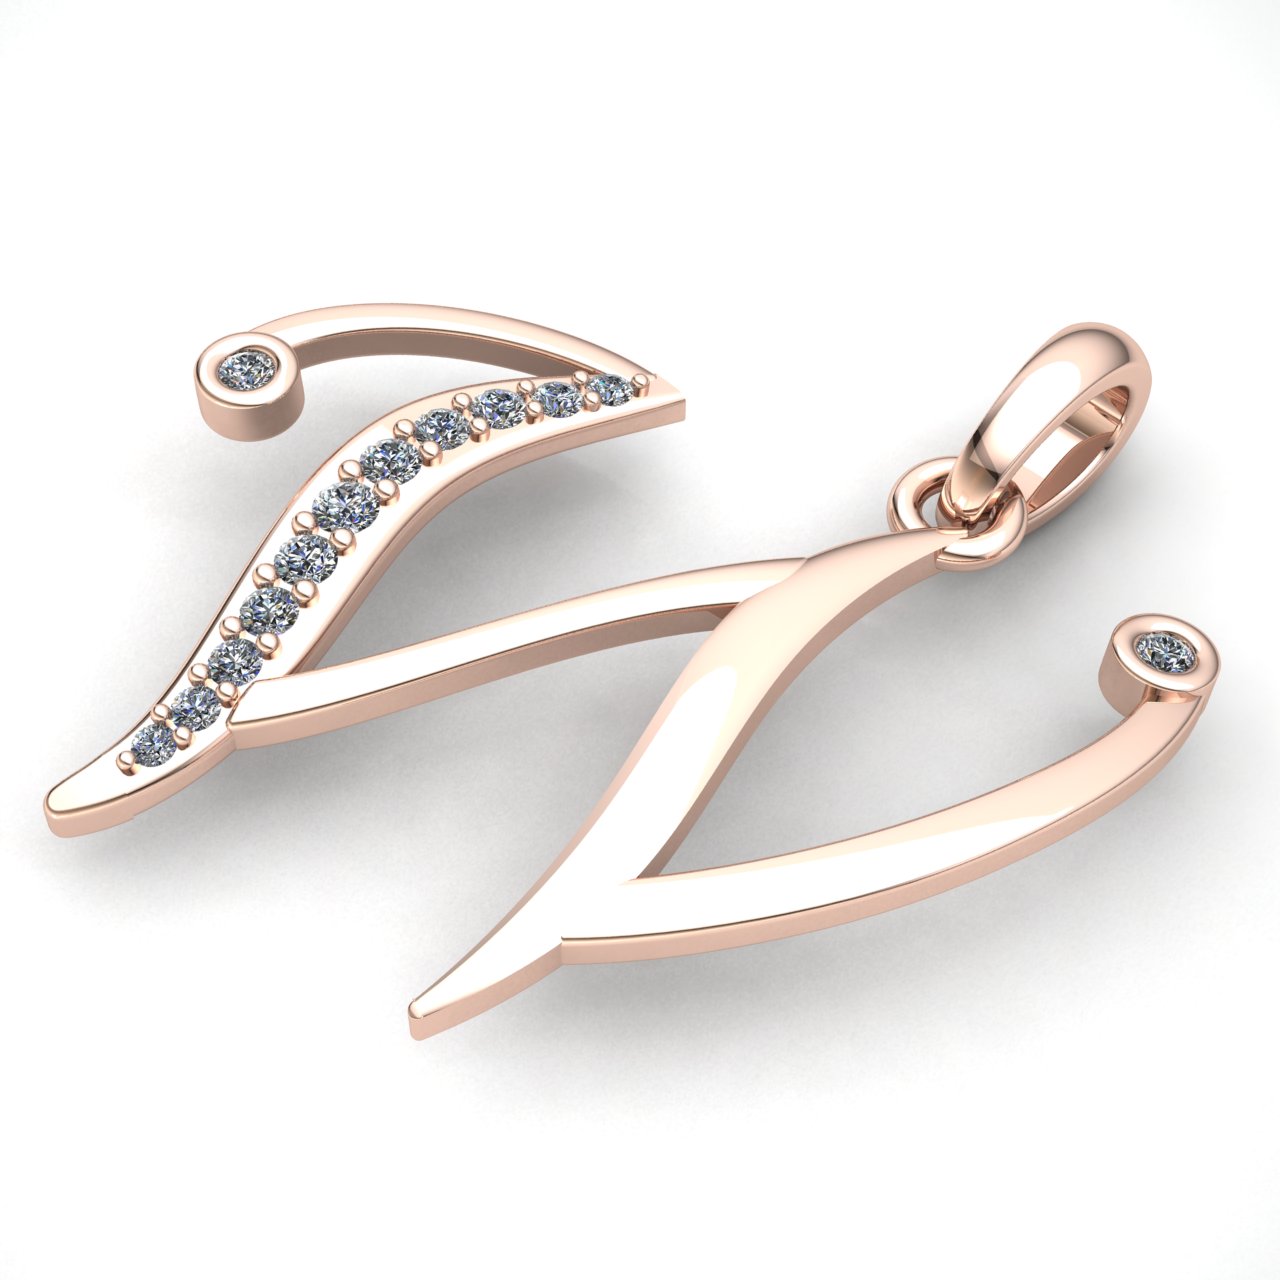 Jewel We Sell Natural 0.5carat Round Cut Diamond Ladies Initial Letter Alphabet 'W' Pendant Solid 18K Rose Gold H SI2